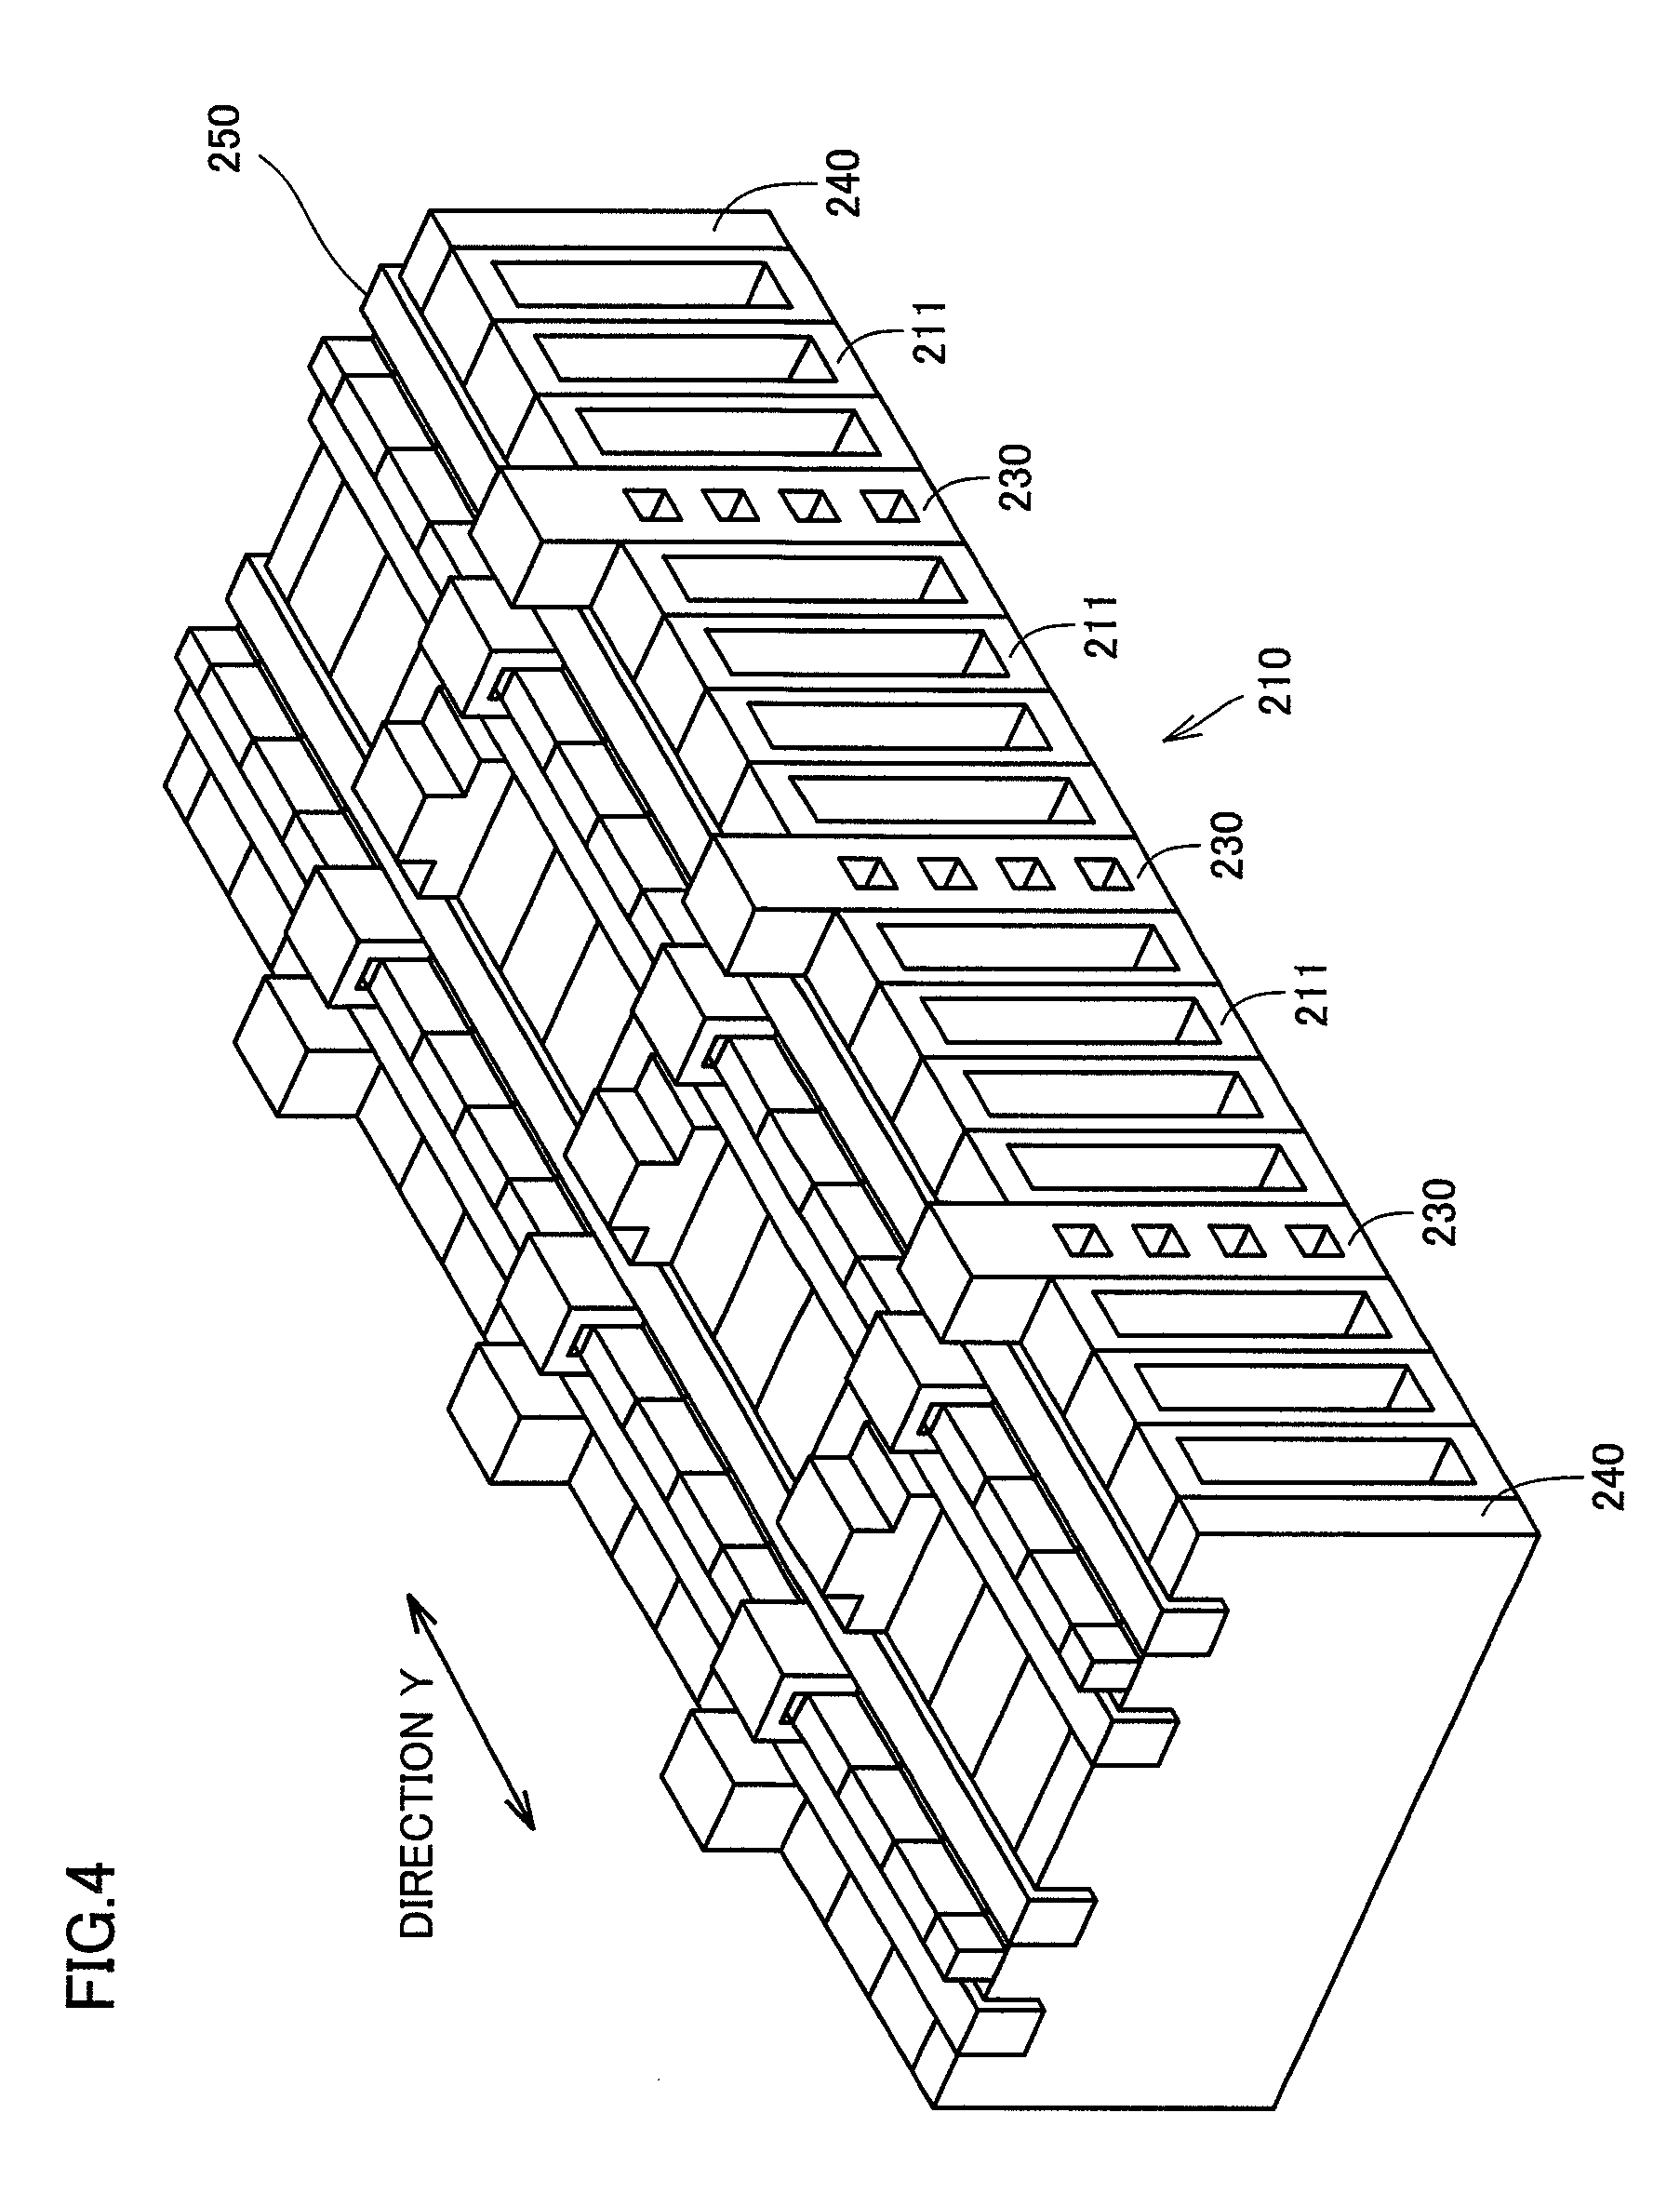 Power storage unit having reinforcing members in a direction crossing the transverse direction